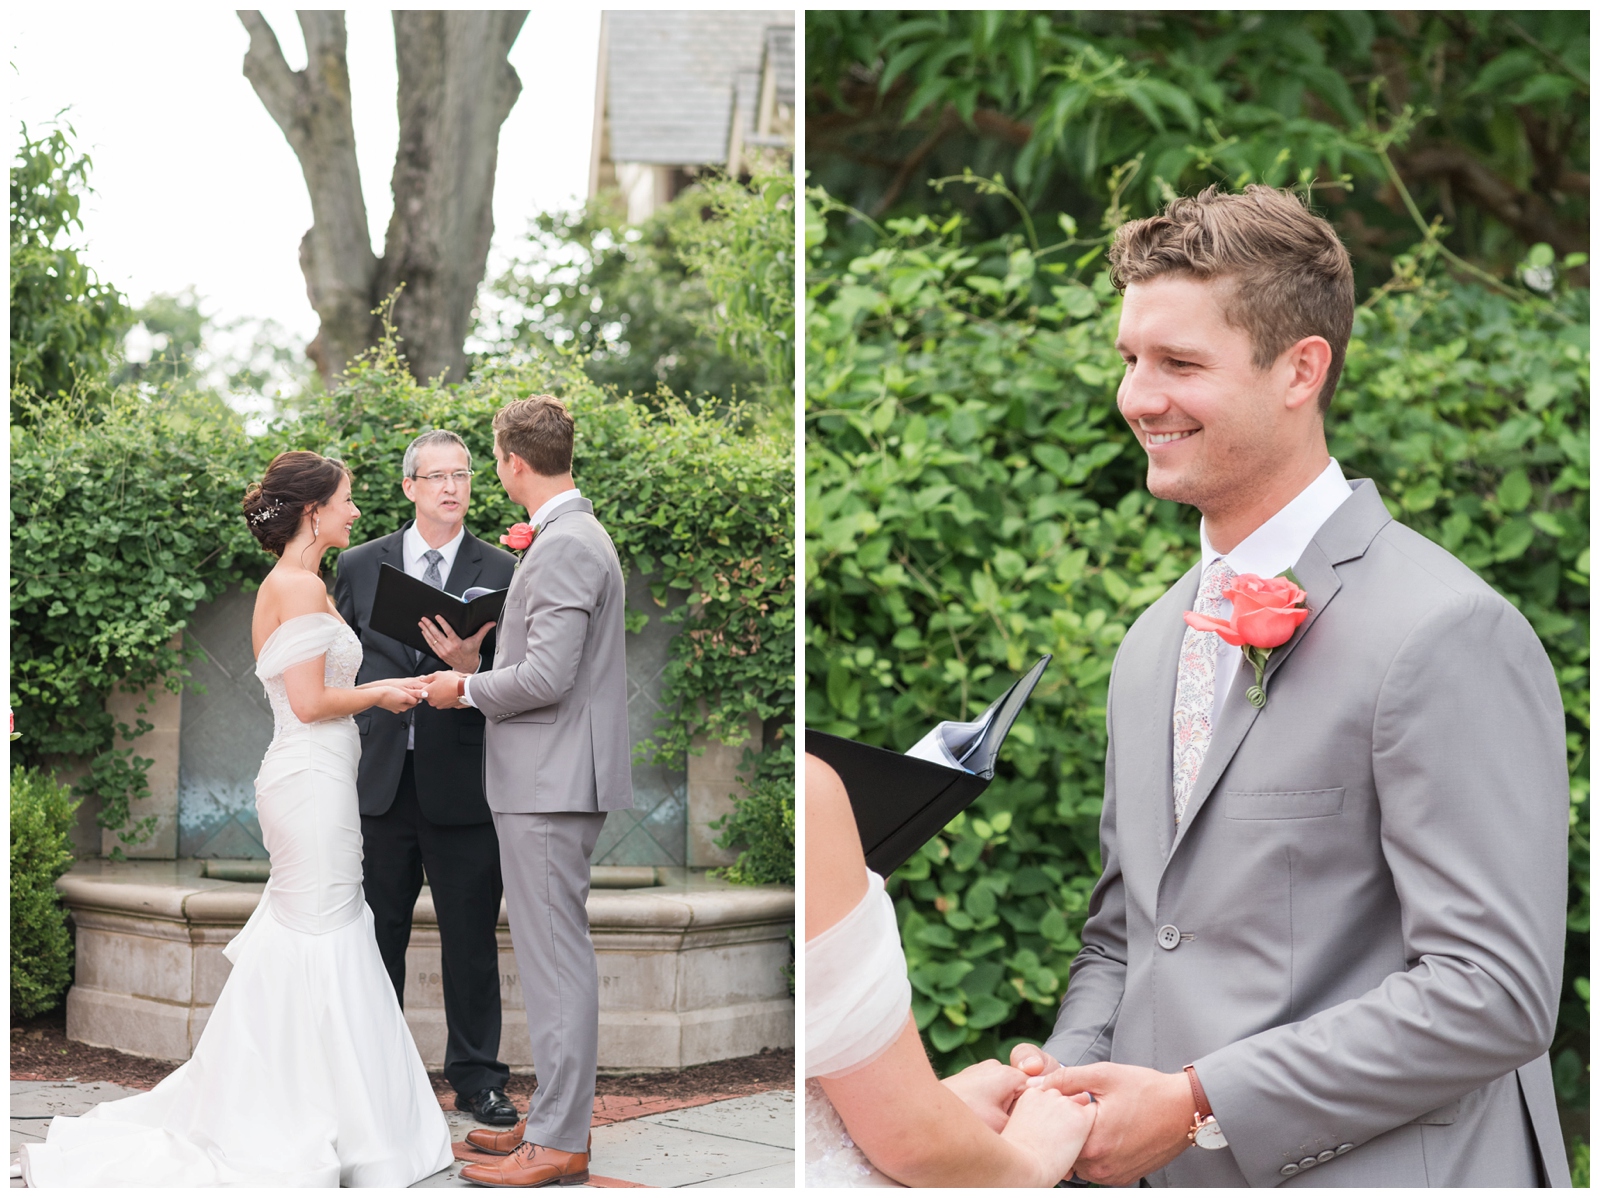 groom smiles at his bride during vows at outdoor garden wedding ceremony in Franklin Park Conservatory